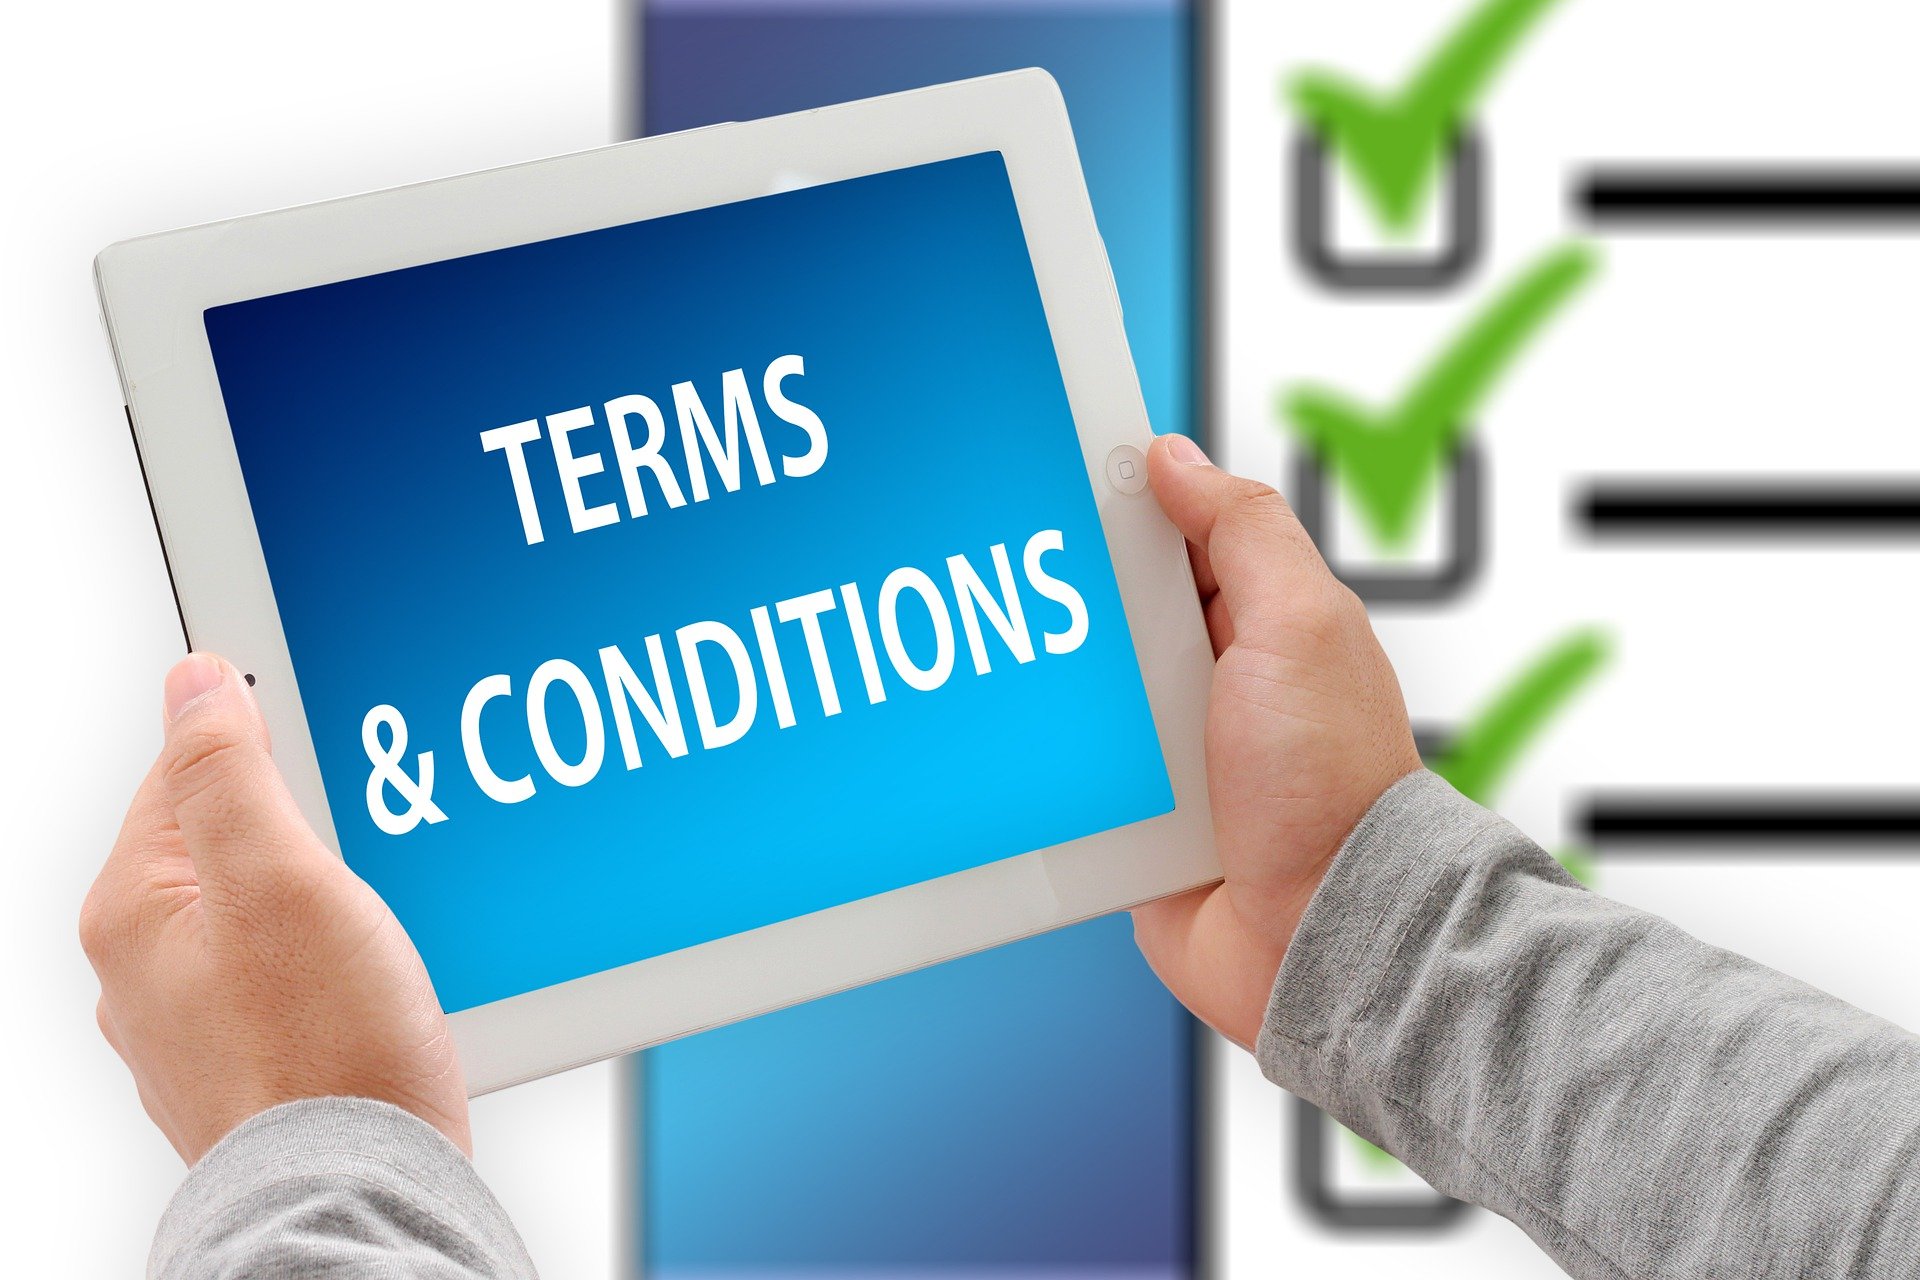 sVang App Terms & Conditions